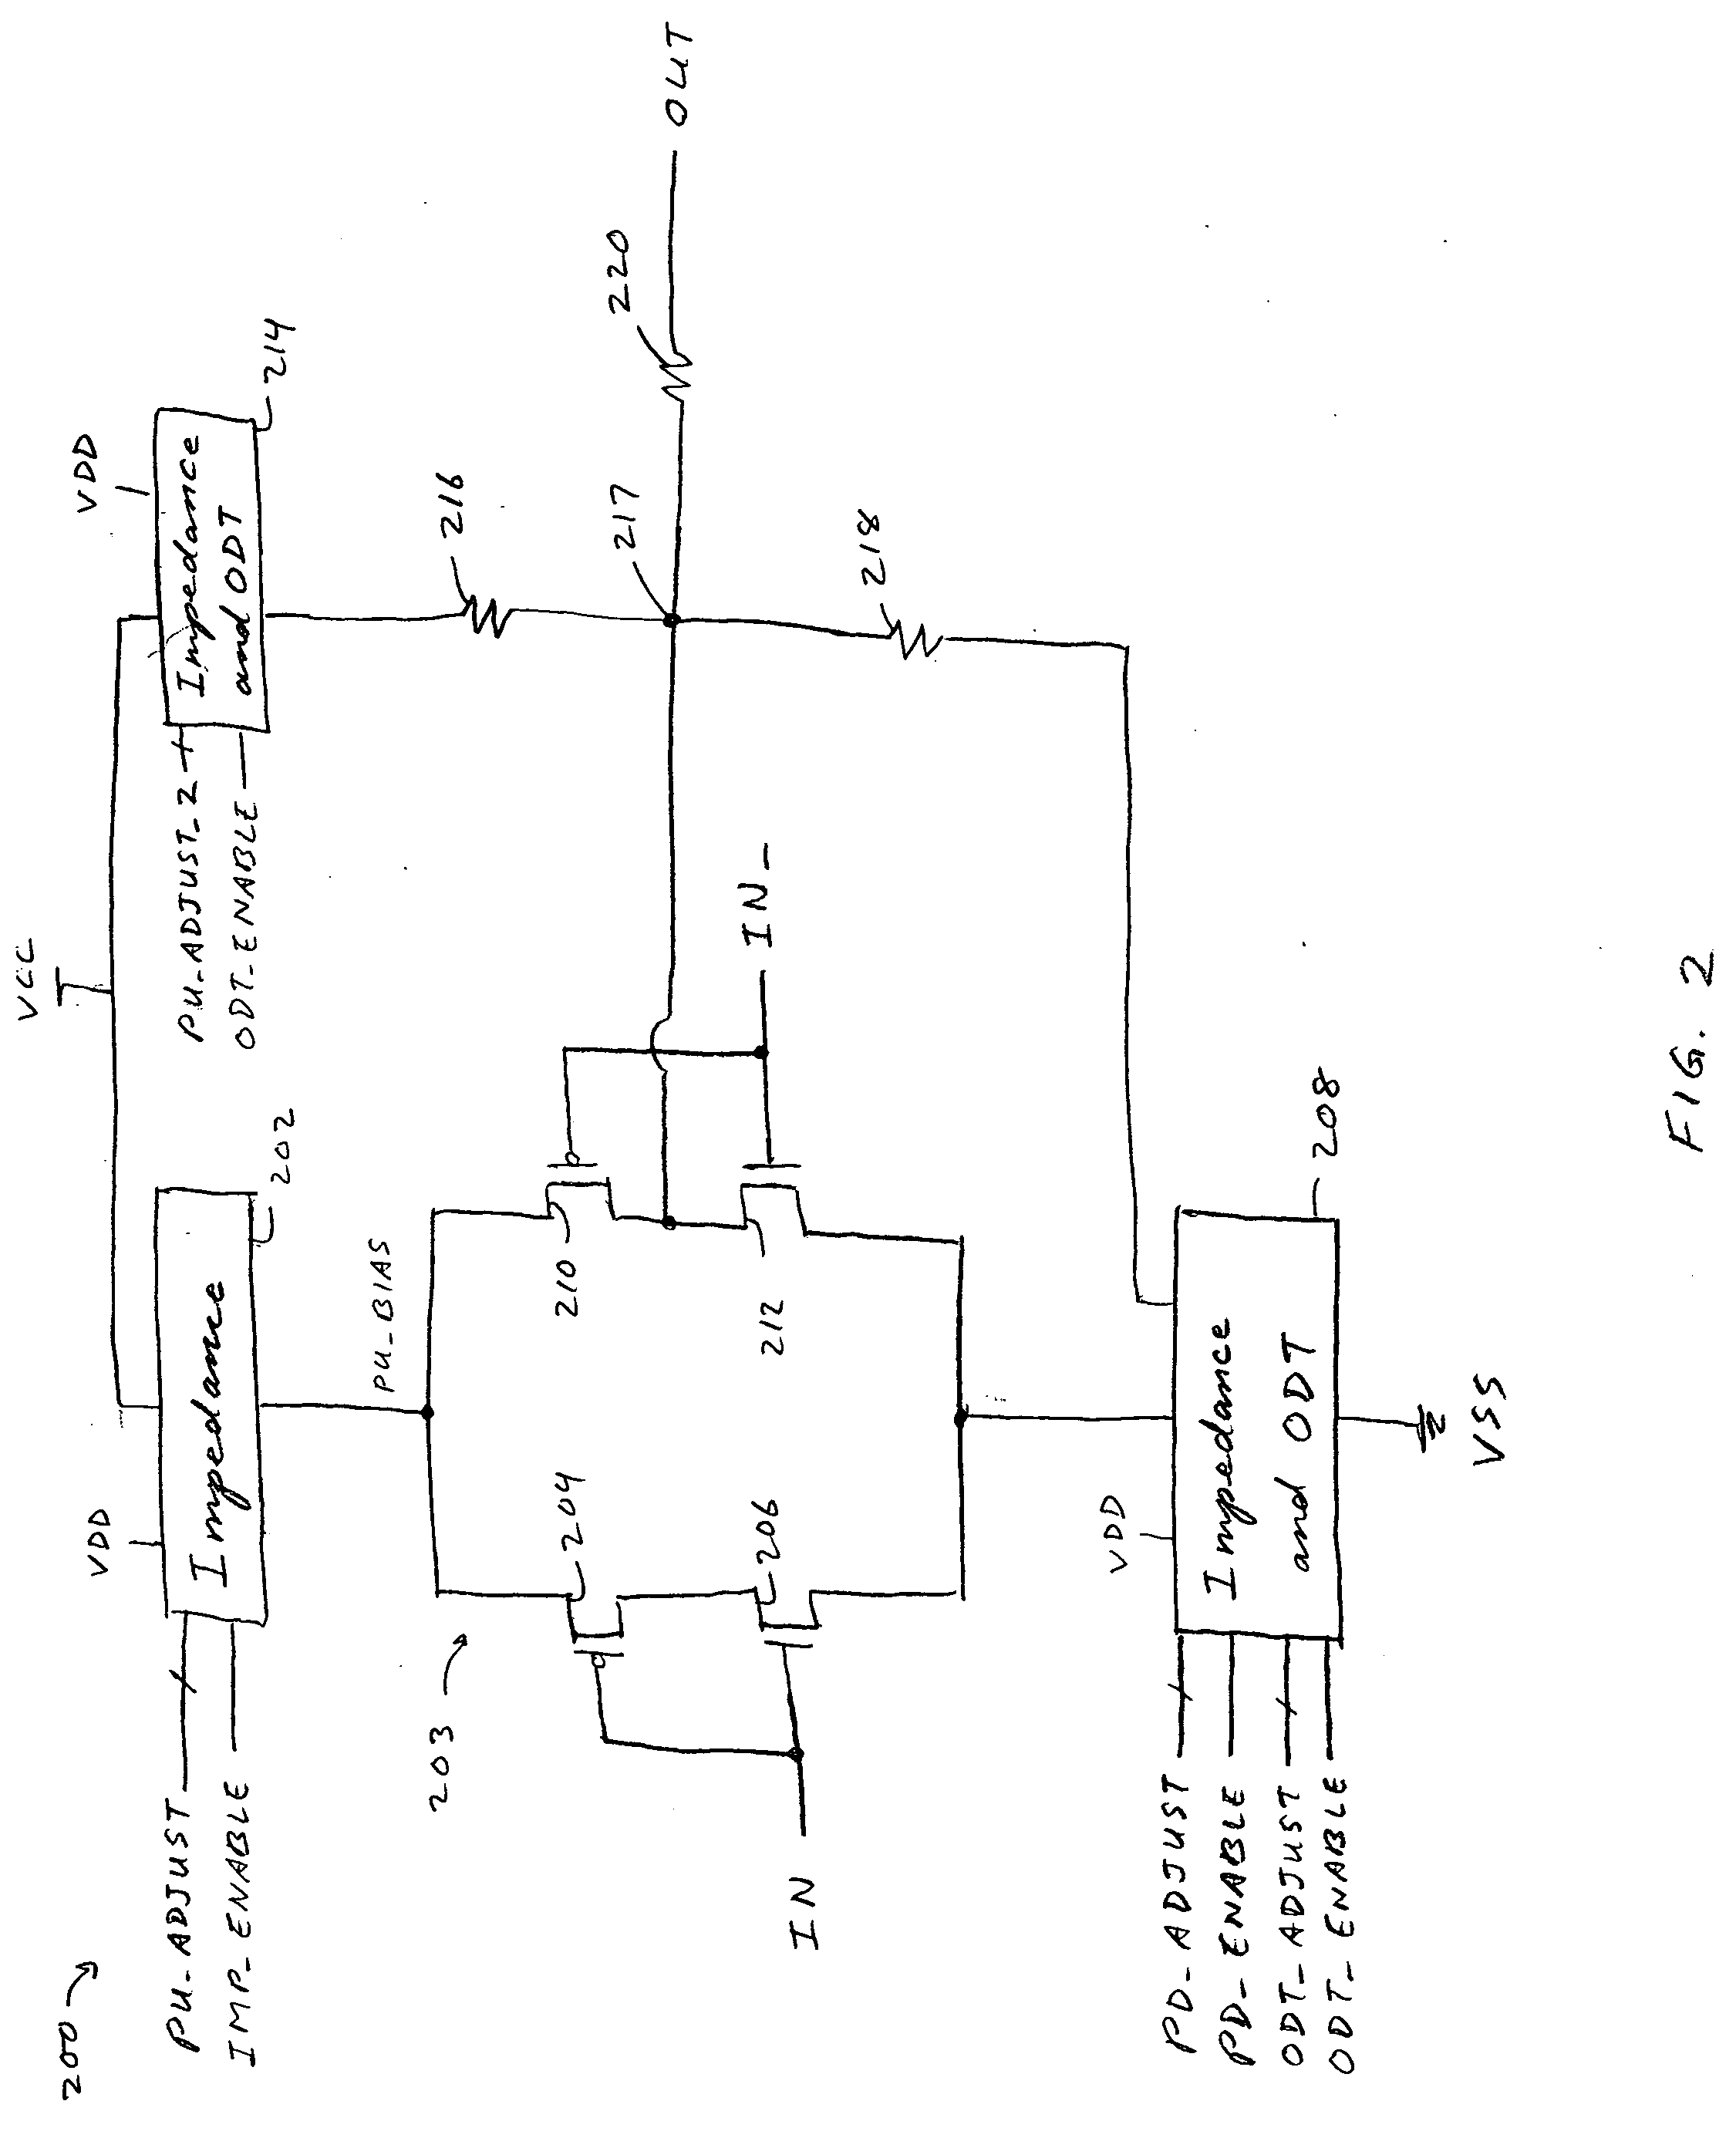 Pseudo-differential output driver with high immunity to noise and jitter